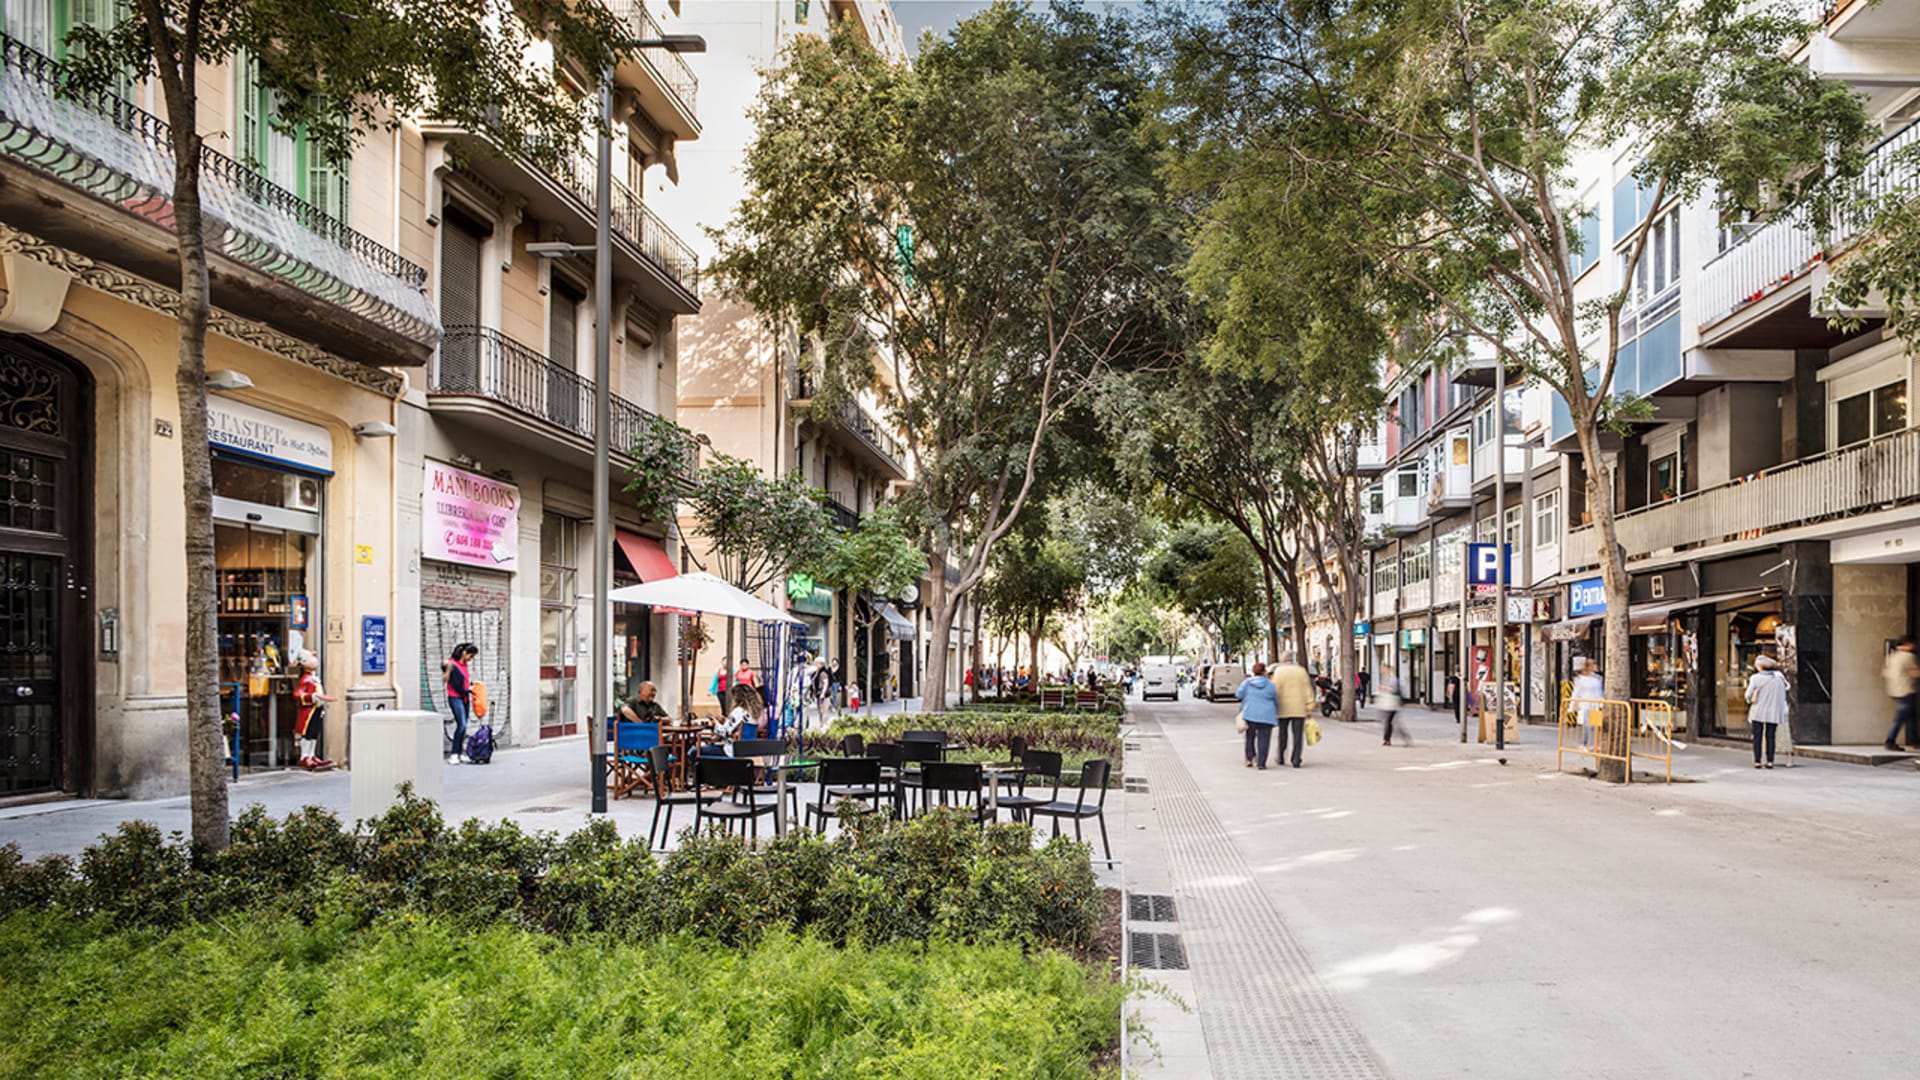 Barcelona is redesigning 21 downtown streets to prioritize people, not cars